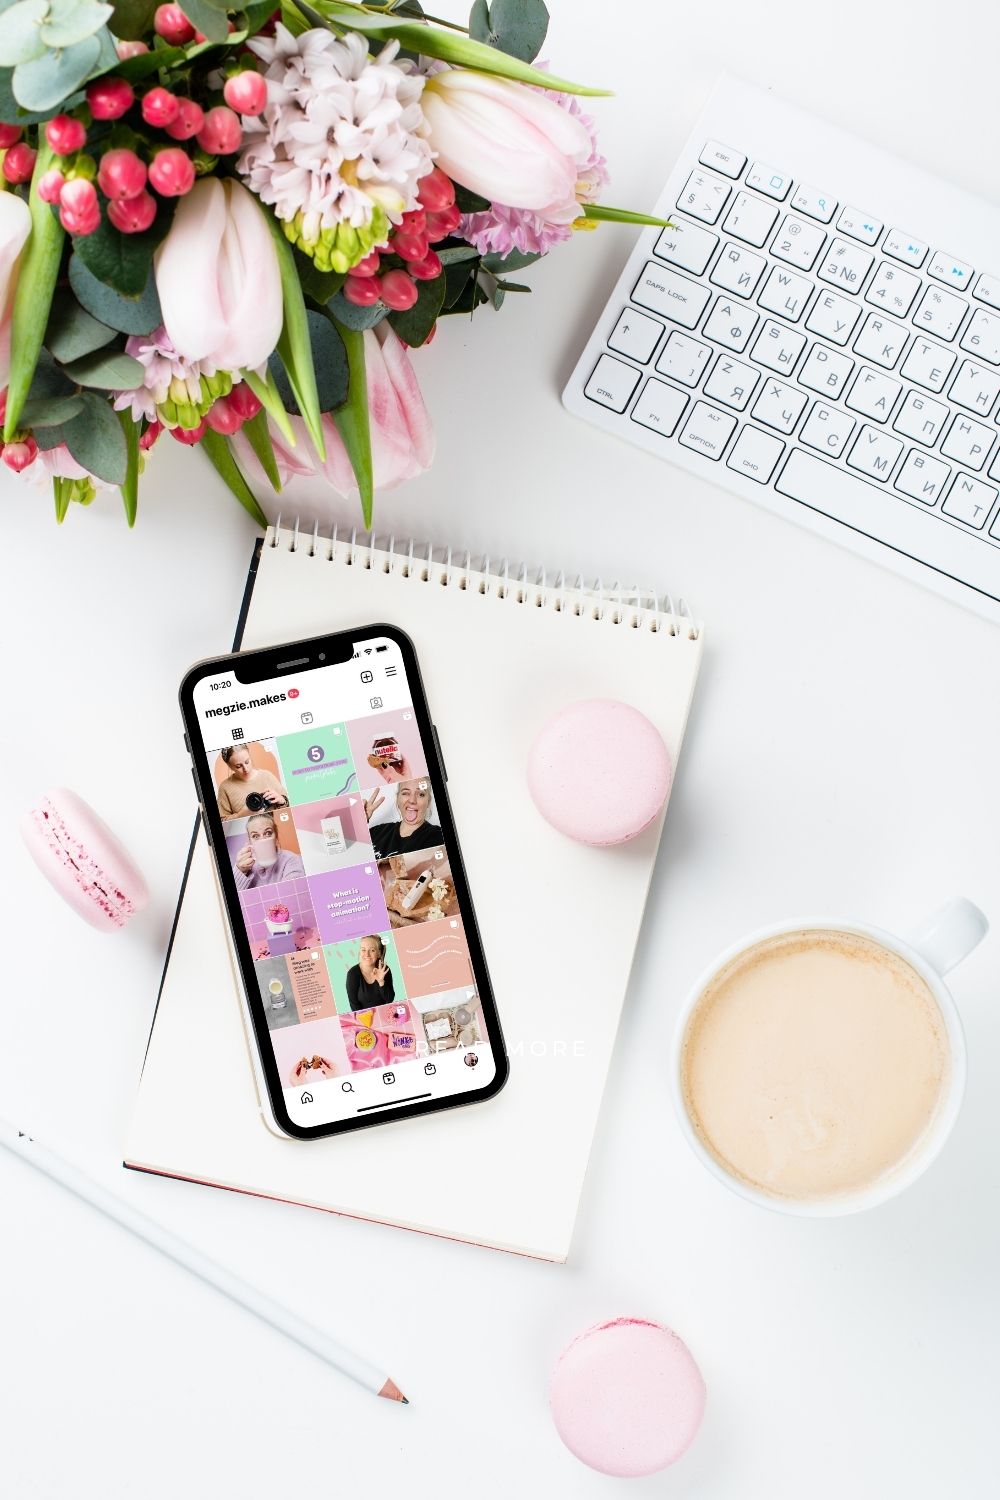 instagram tips and resources by megzie makes